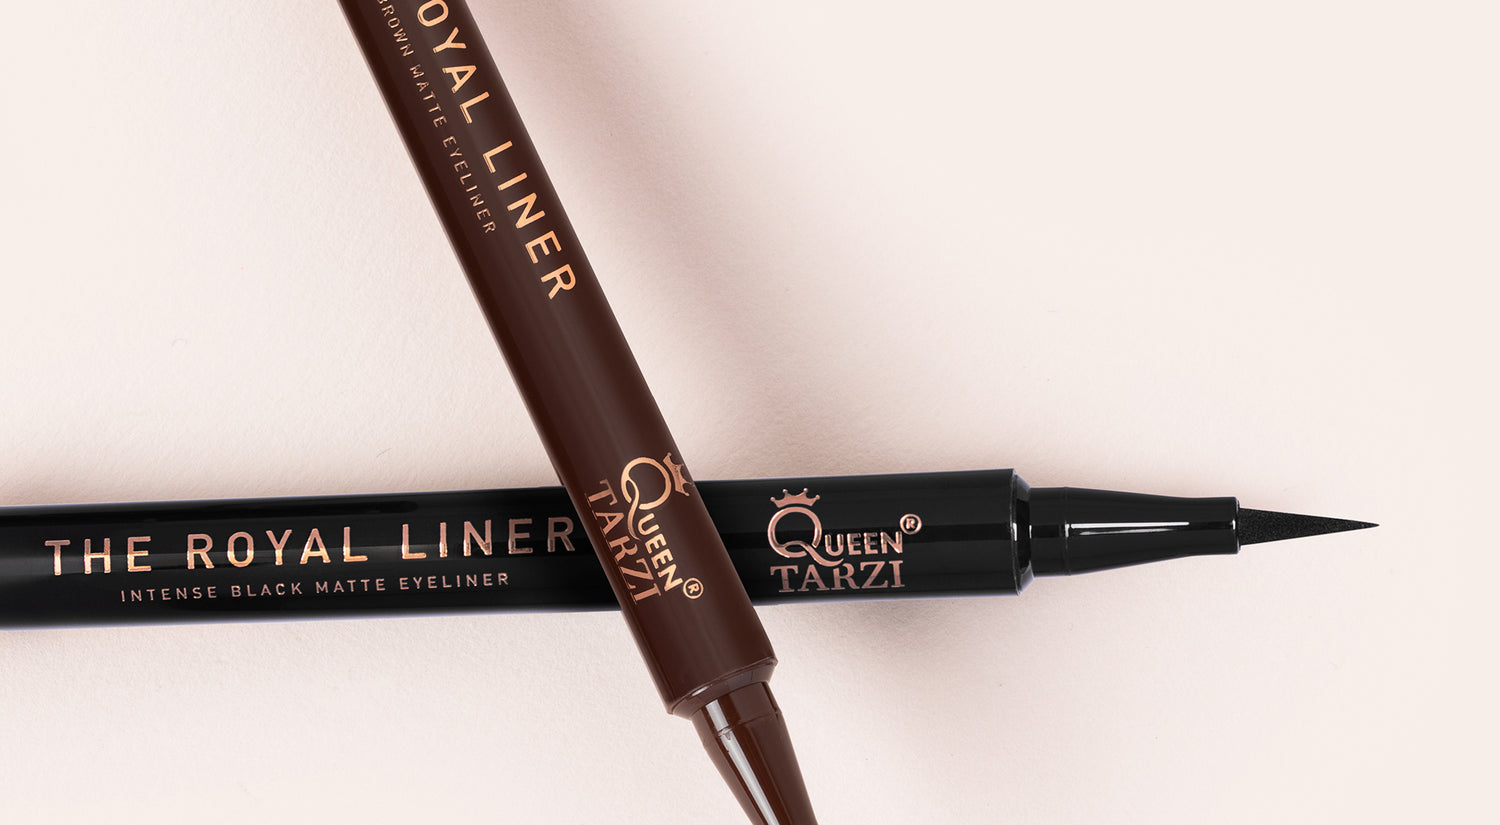 How do you apply the most beautiful eyeliner?